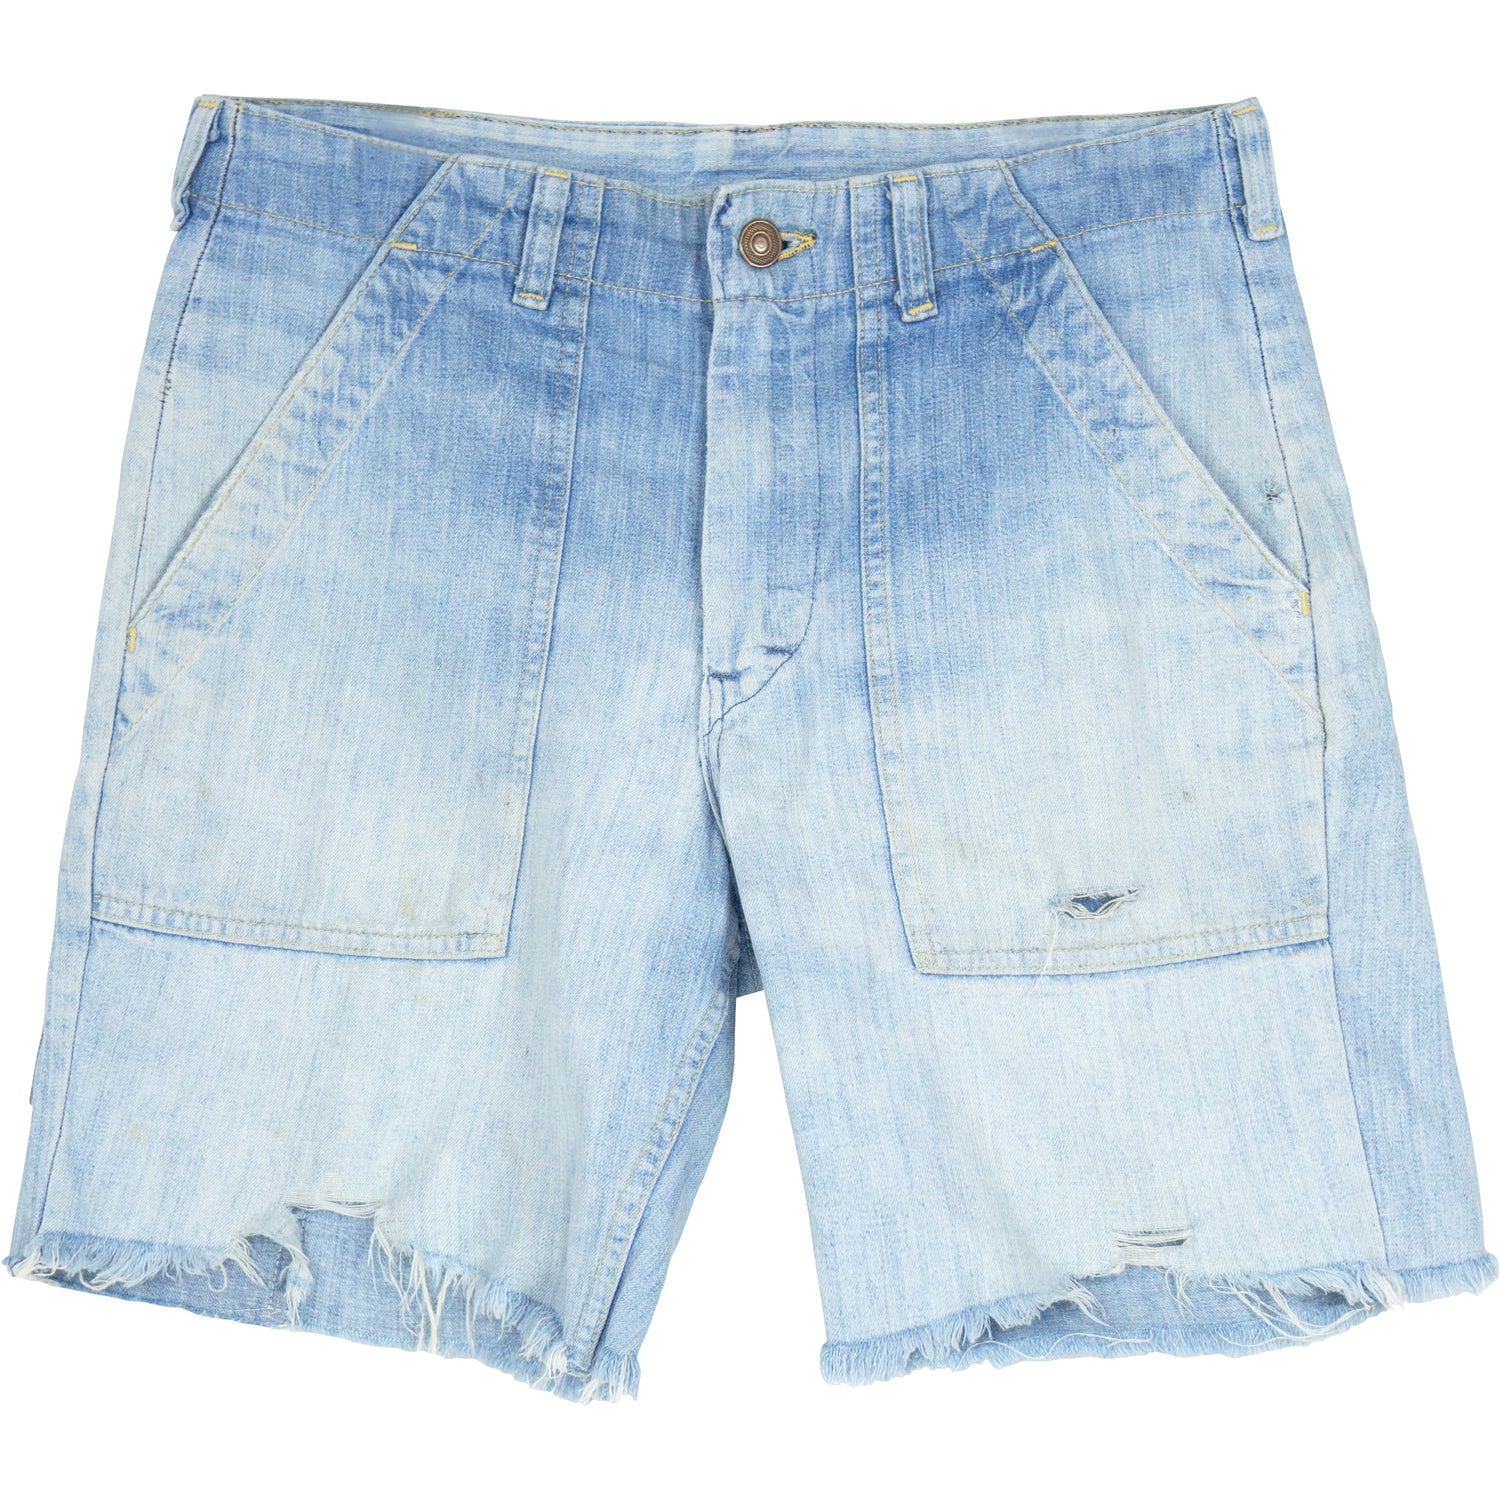 VINTAGE FADED CUT-OFF SHORTS - SIZE 31